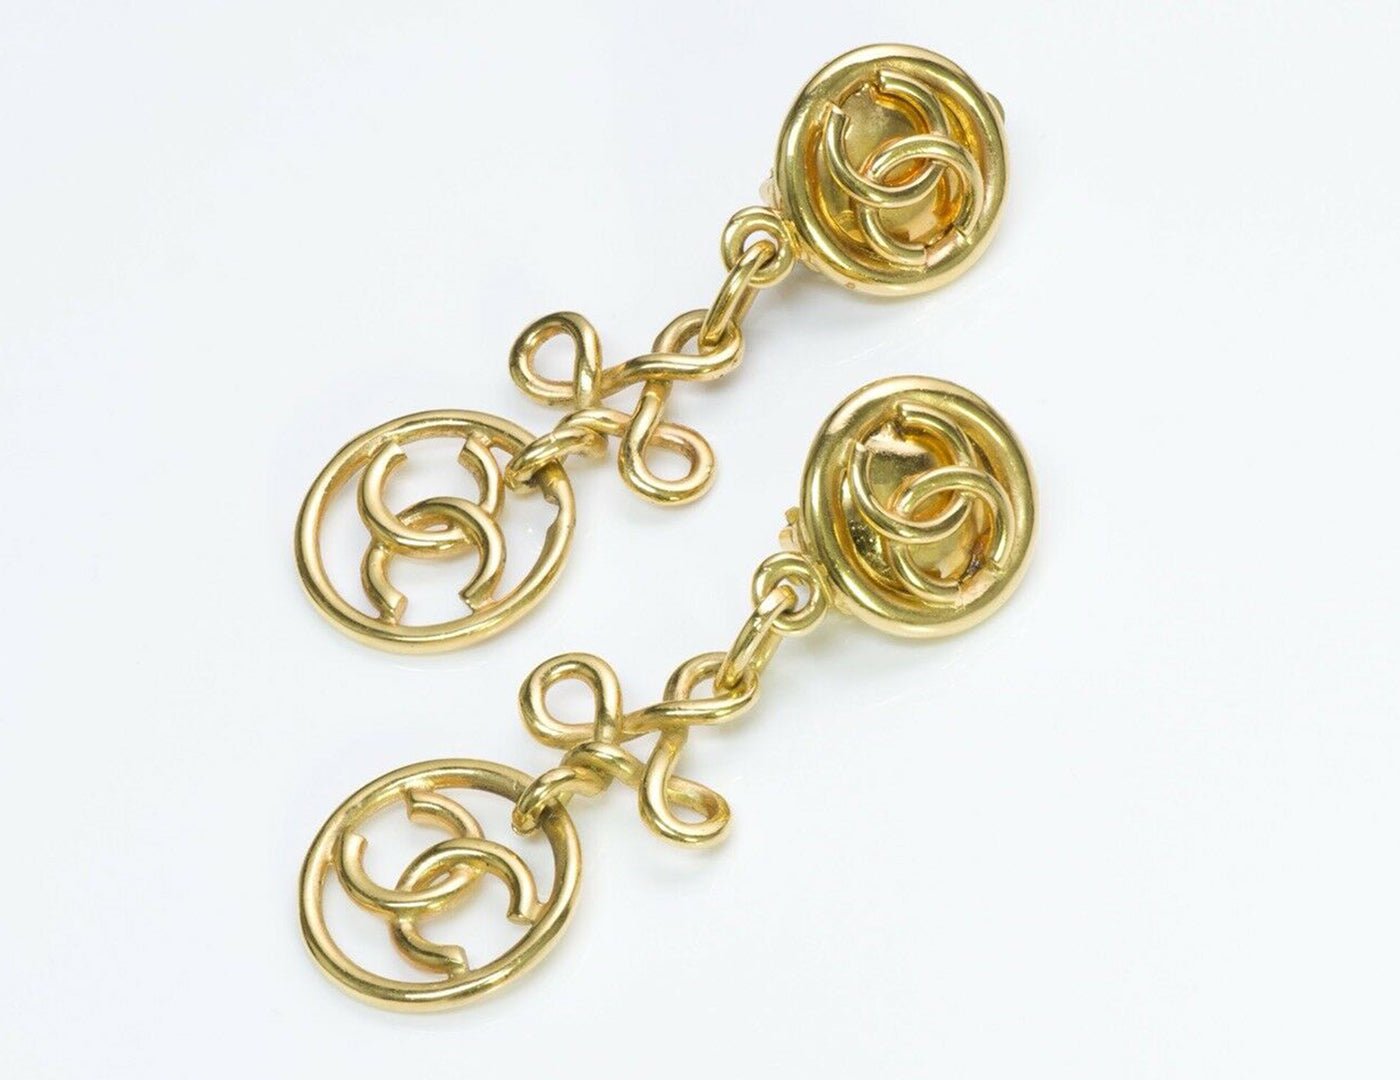 Vintage Chanel CC Gold Tone Earrings 1993 Collection